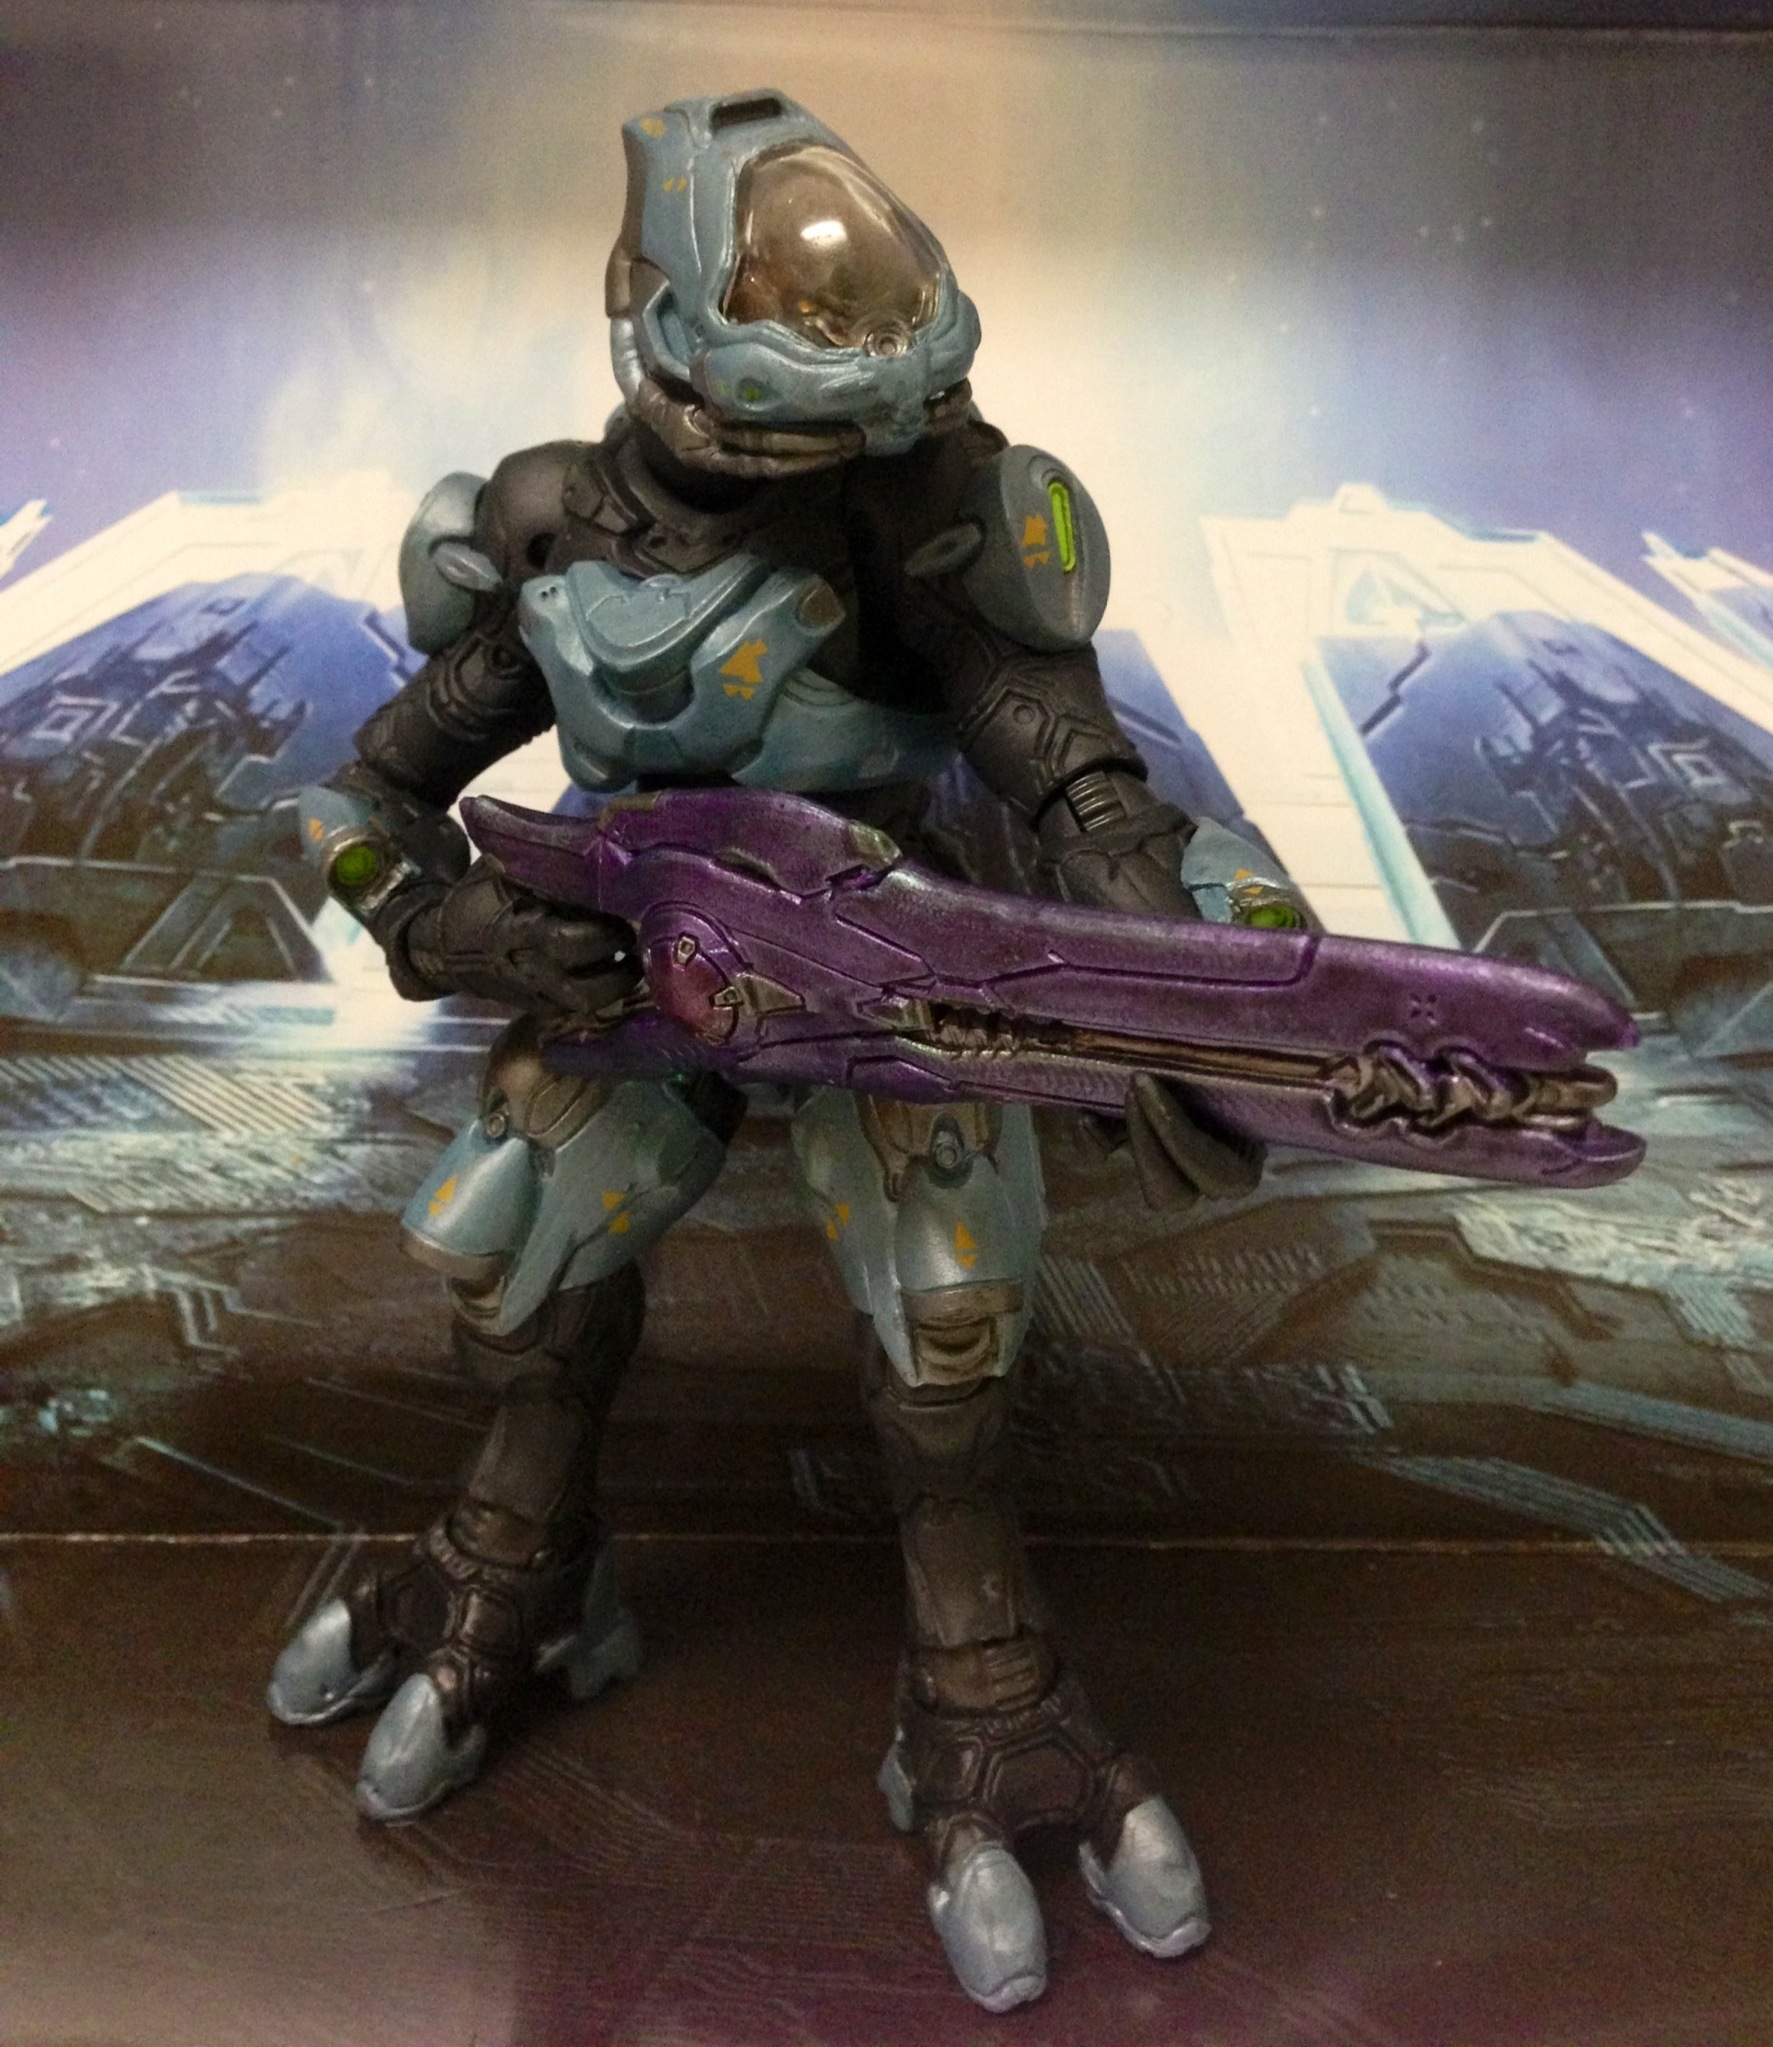 the Halo Elite Ranger can actually hold the weapon that he’s packaged with ...